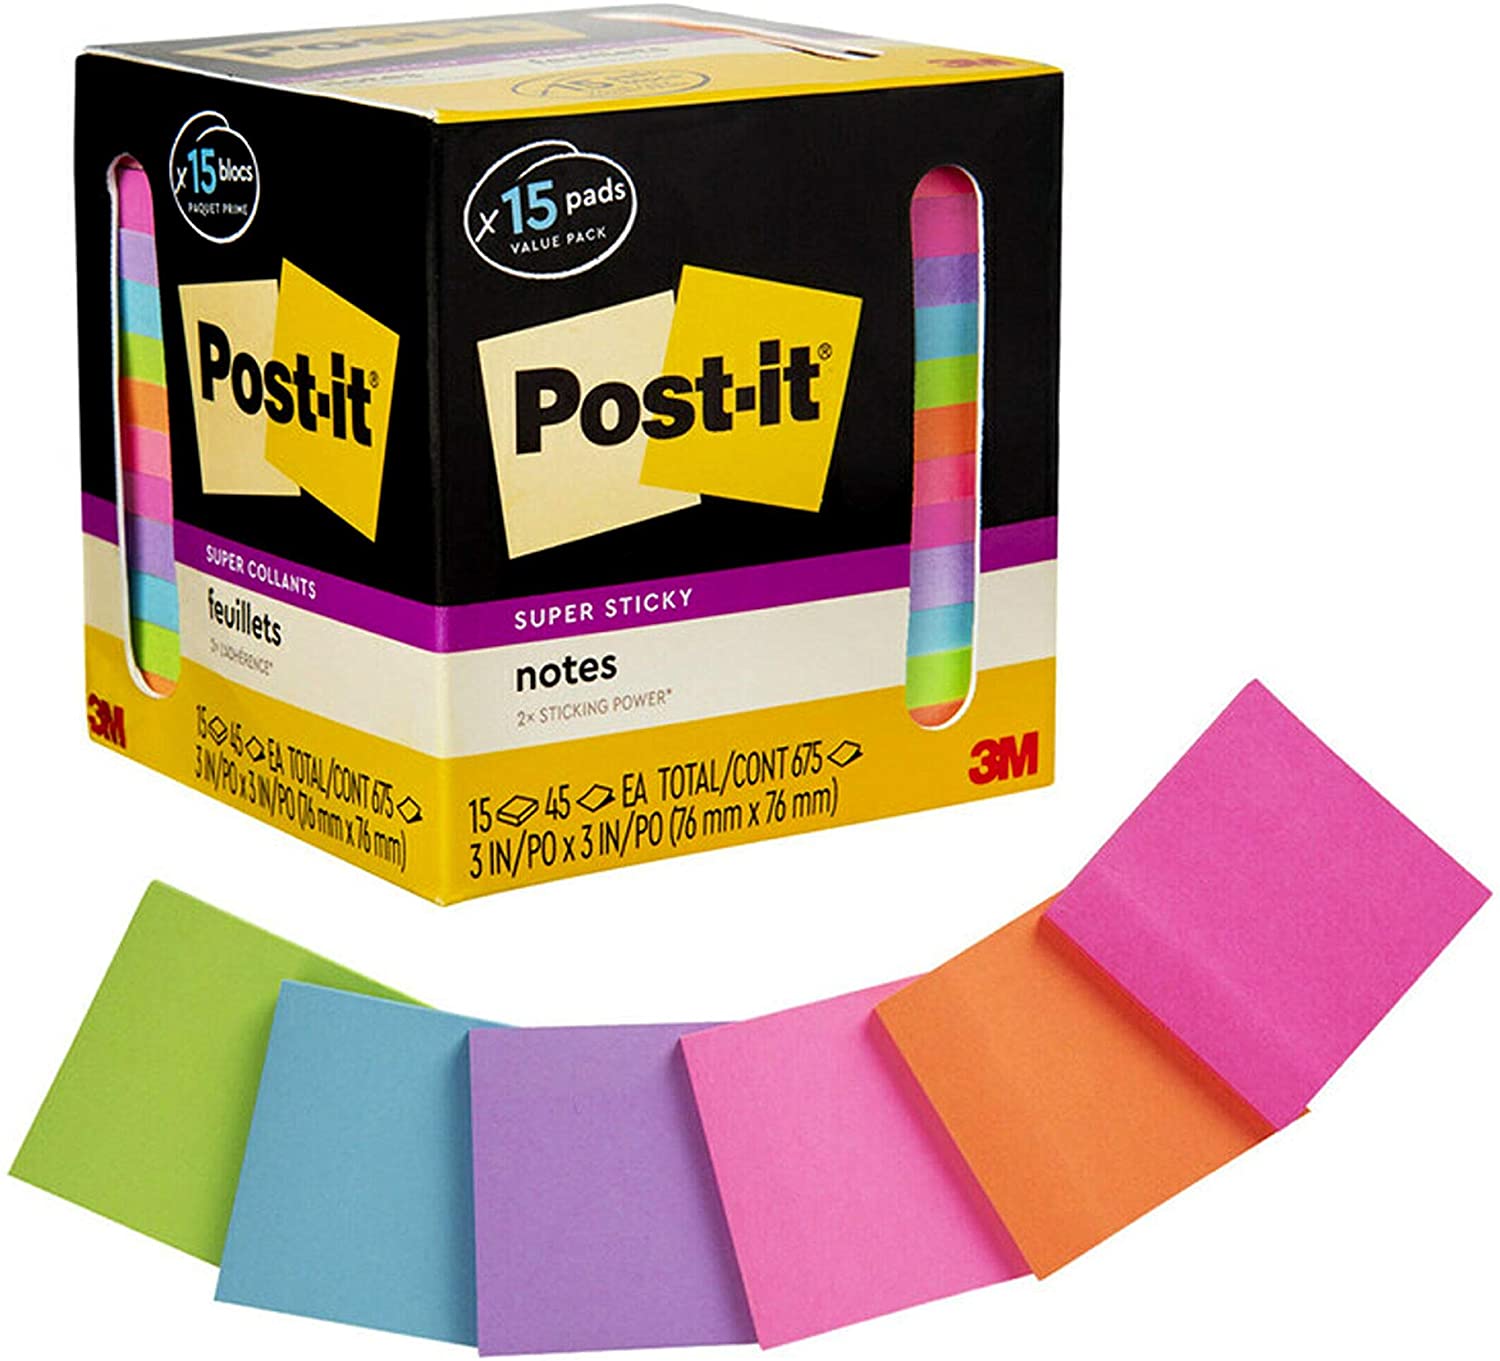  Post-it Super Sticky Notes, Assorted Bright Colors, 3 in x 3 in, 15 Pads/Pack, 45 Sheets/Pad, 2x the Sticking Power, Recyclable (654-15SSCP), Multi-color